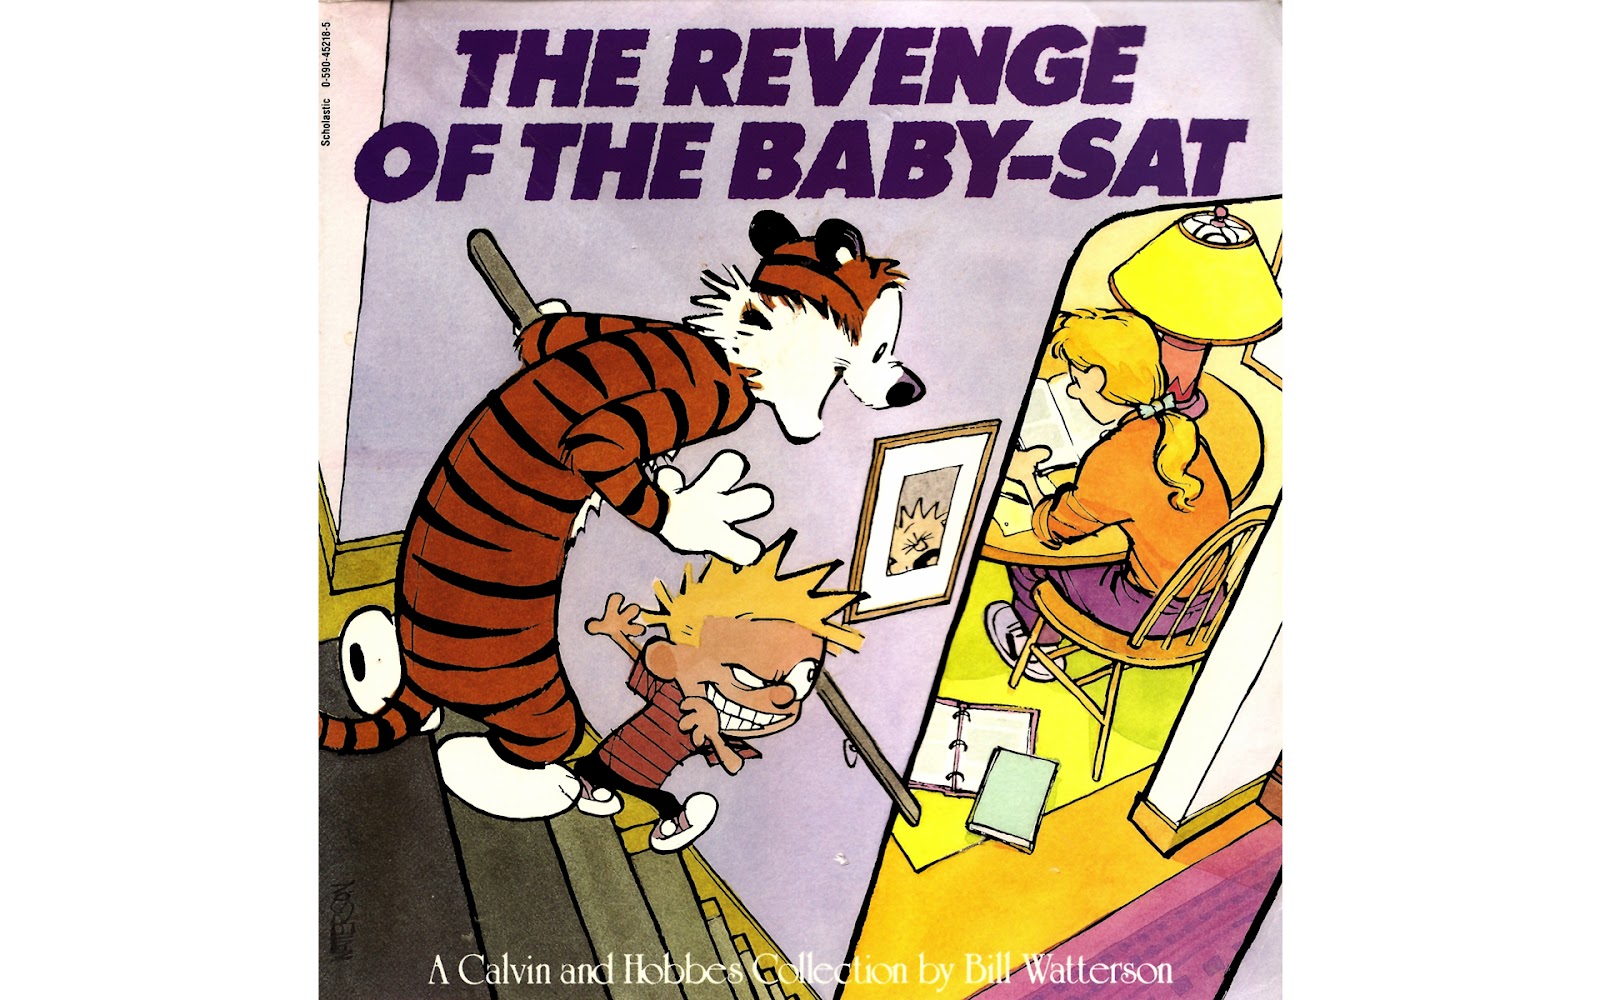 Calvin And Hobbes 05 | Read Calvin And Hobbes 05 comic online in high  quality. Read Full Comic online for free - Read comics online in high  quality .| READ COMIC ONLINE